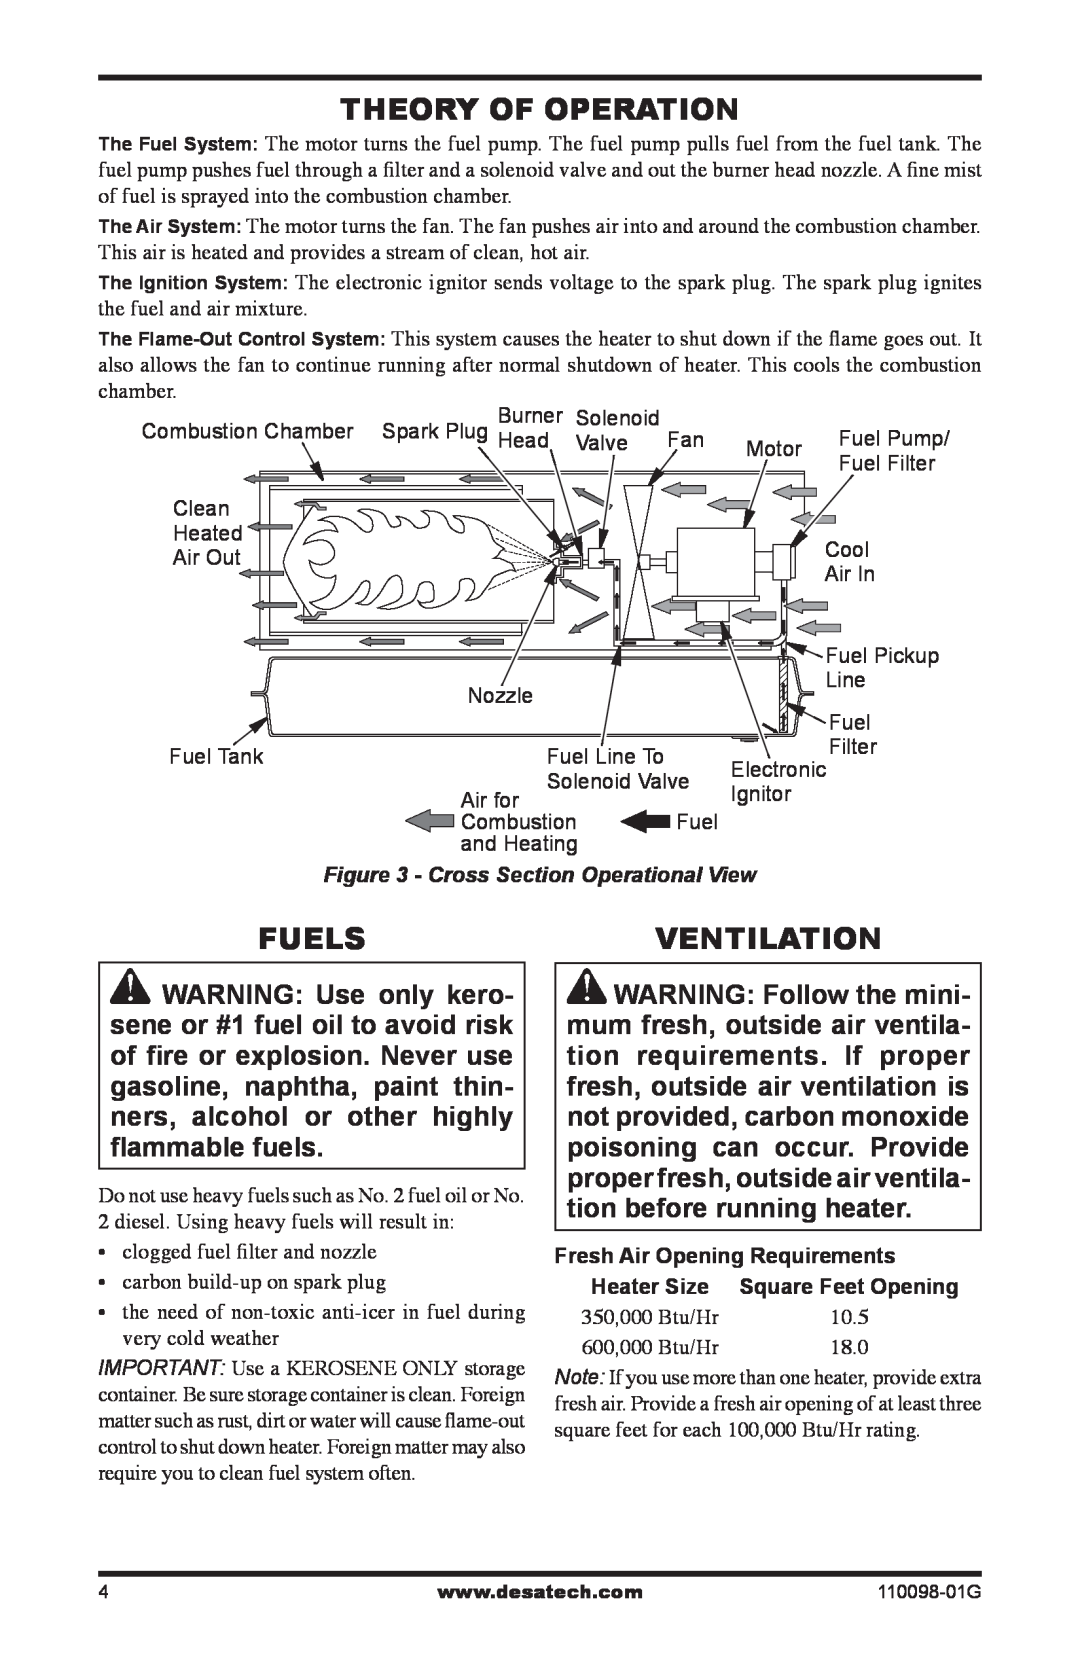 Desa Tech HEATERS OWNER'S MANUAL owner manual Theory Of Operation, Fuels, Ventilation, not provided, carbon monoxide 